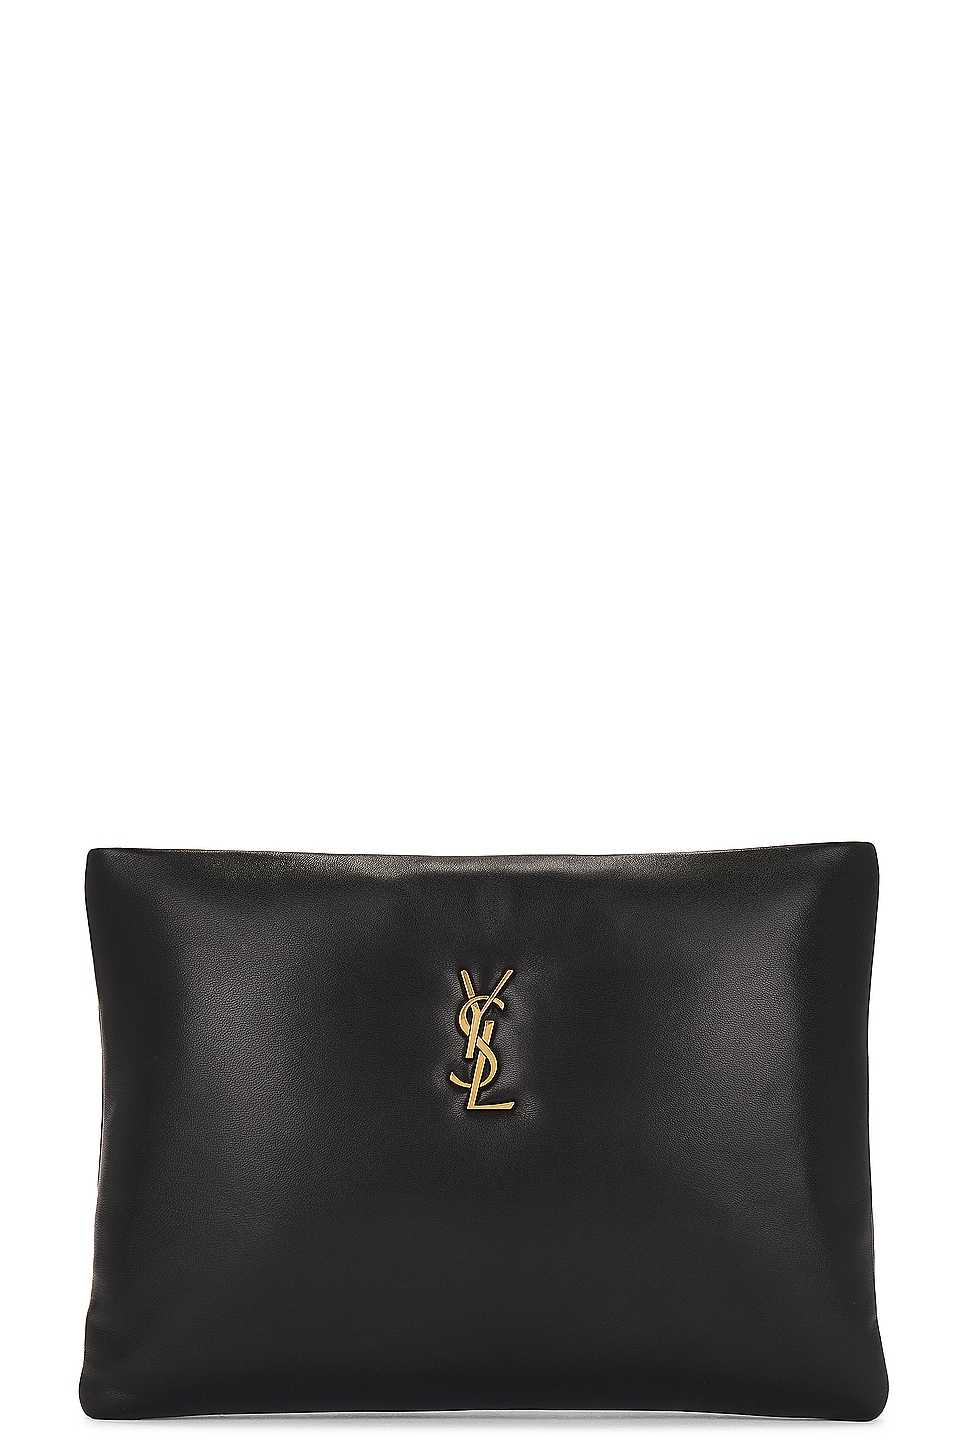 Large Calypso Zipped Pouch in Black